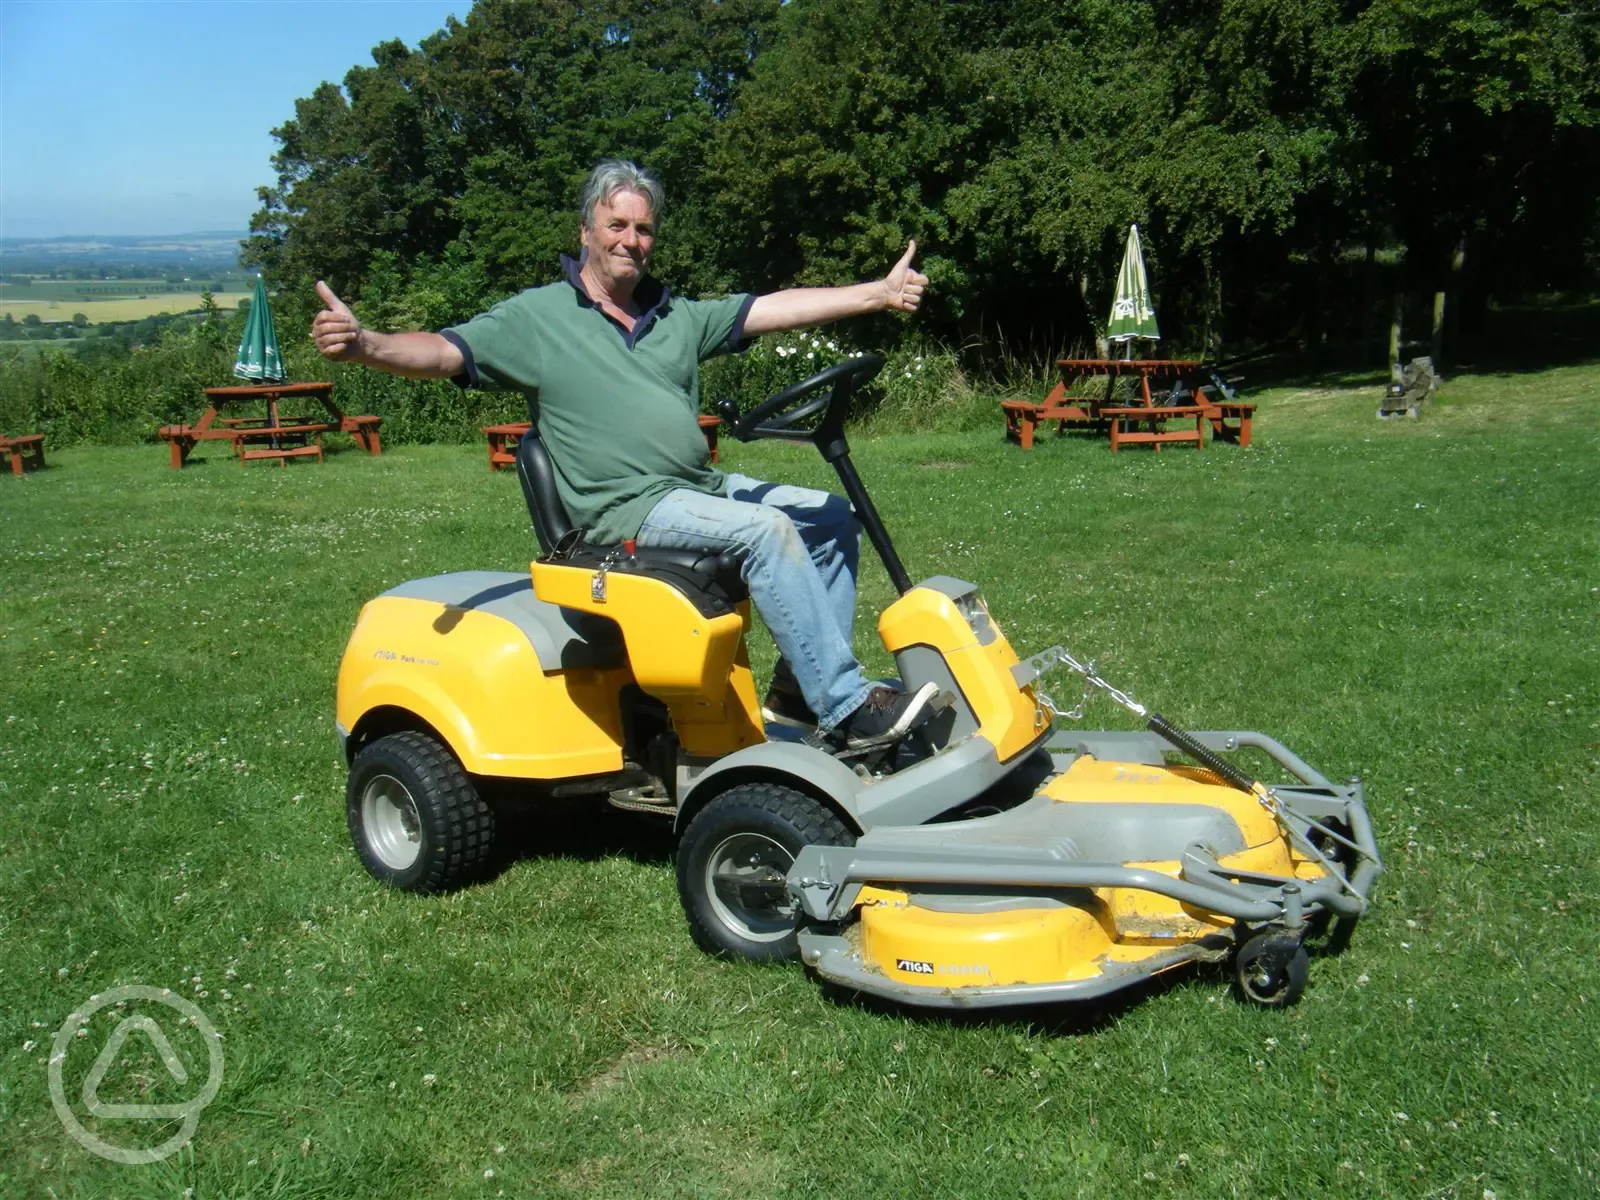 Ken - one of the owners being a friendly mower man